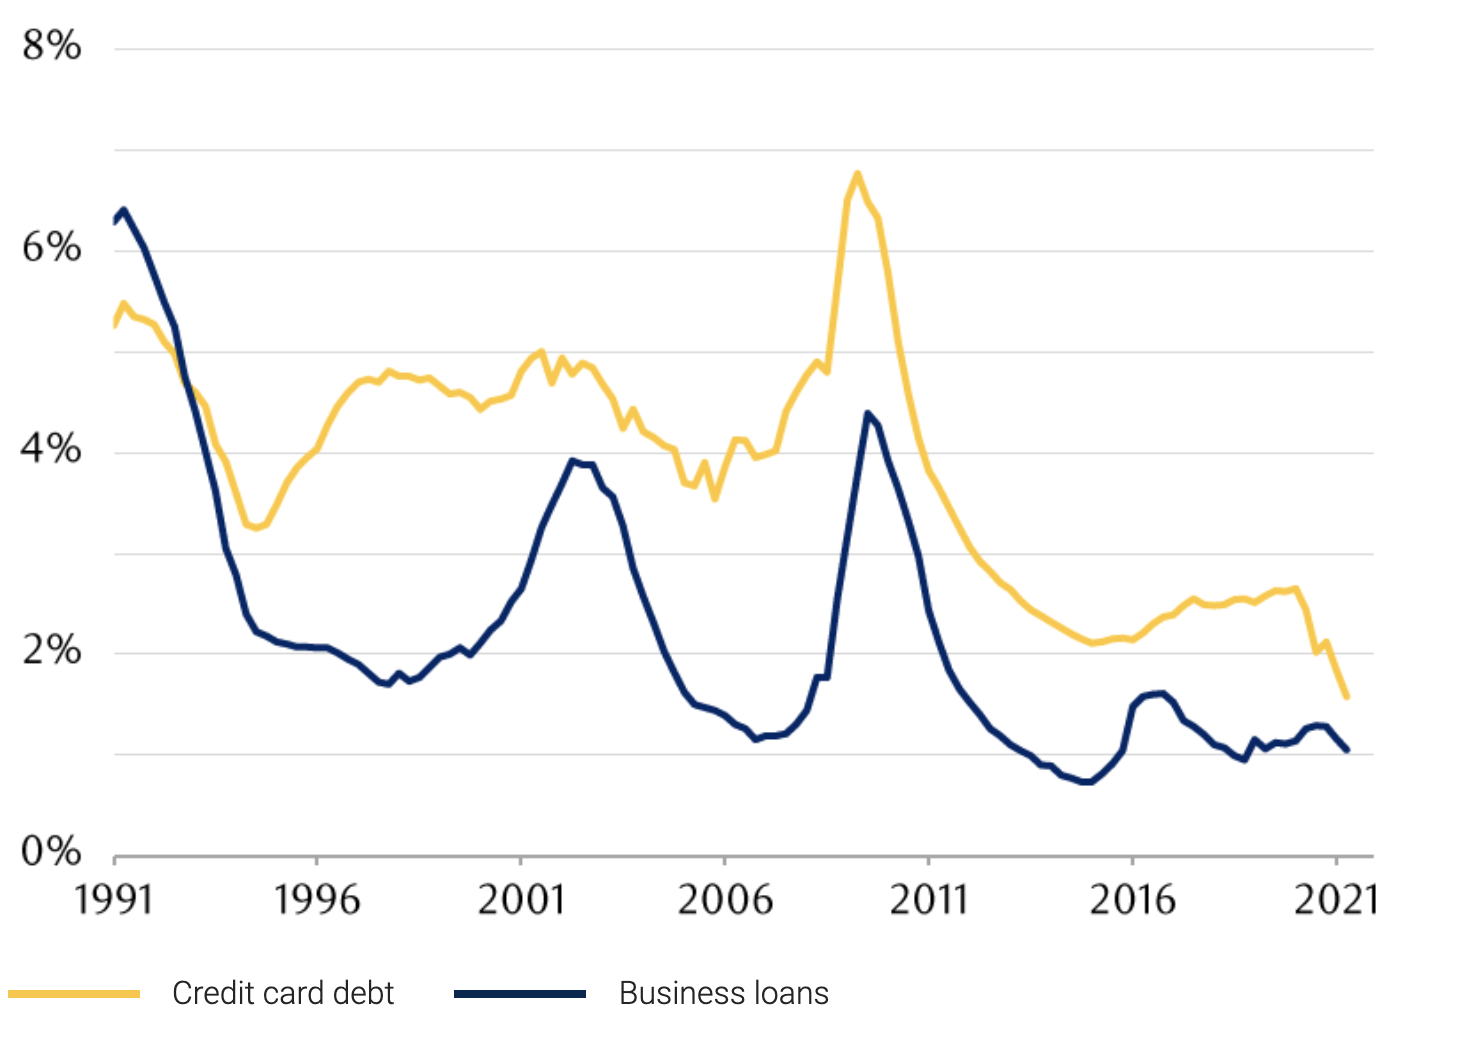 Line chart showing the percentage of loans delinquent at U.S. commercial banks, as tracked by the U.S. Federal Reserve, monthly from 1991 through April 2021 in two categories: credit card debt and business loans. Credit card delinquencies were above 5% in 1991 and reached a high of nearly 7% in early 2009, but are now less than 2%. Business loan delinquencies reached a high of over 6% in 1991 and secondary peaks around 4% in 2002 and early 2009, but are now around 1%.